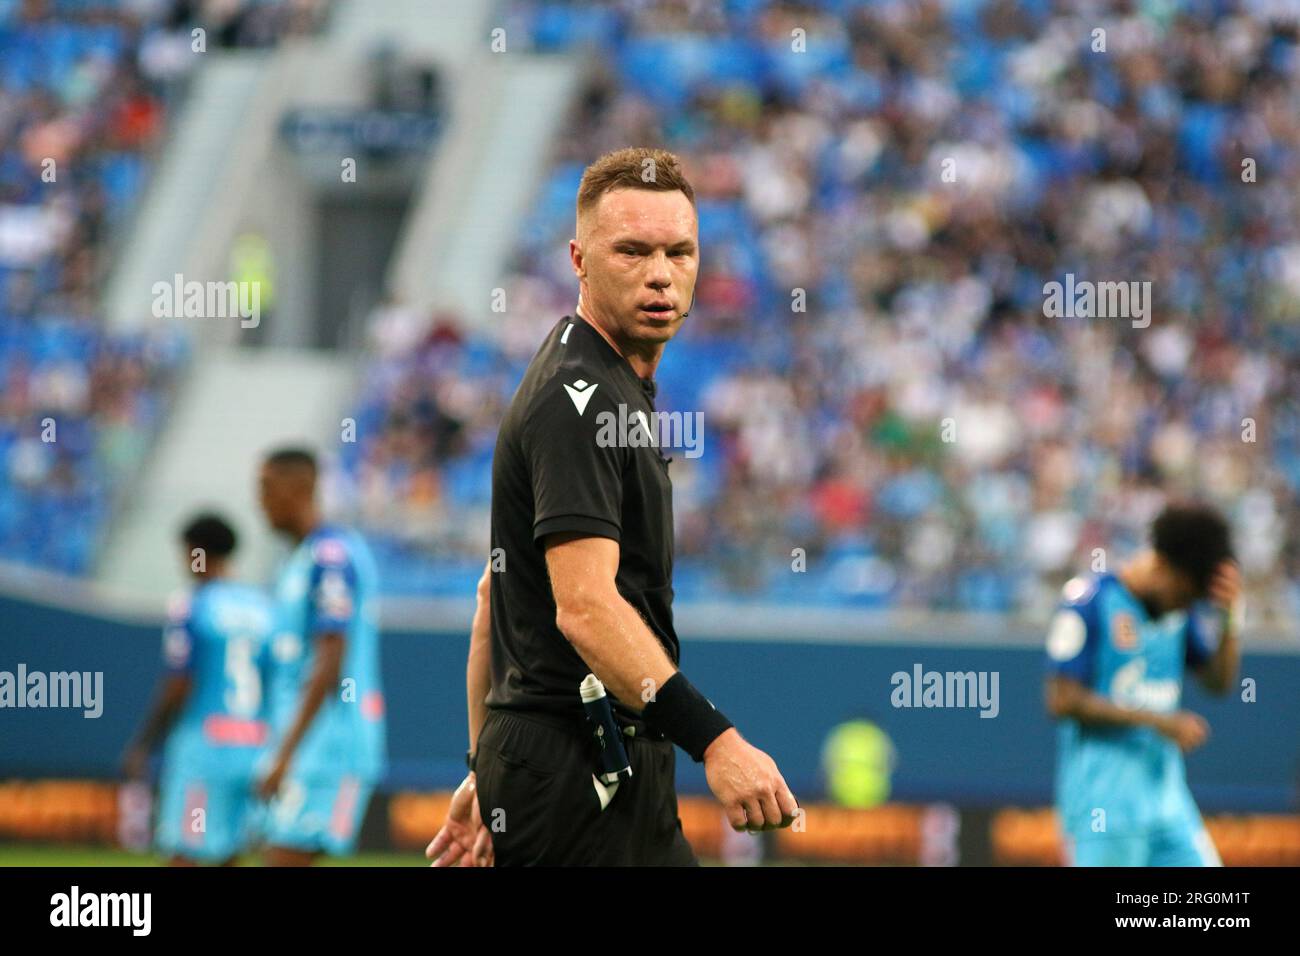 Saint Petersburg, Russia. 06th Aug, 2023. Aleksey Amelin, chief judge seen during the Russian Premier League football match between Zenit Saint Petersburg and Dynamo Moscow at Gazprom Arena. Zenit 2:3 Dynamo. (Photo by Maksim Konstantinov/SOPA Images/Sipa USA) Credit: Sipa USA/Alamy Live News Stock Photo